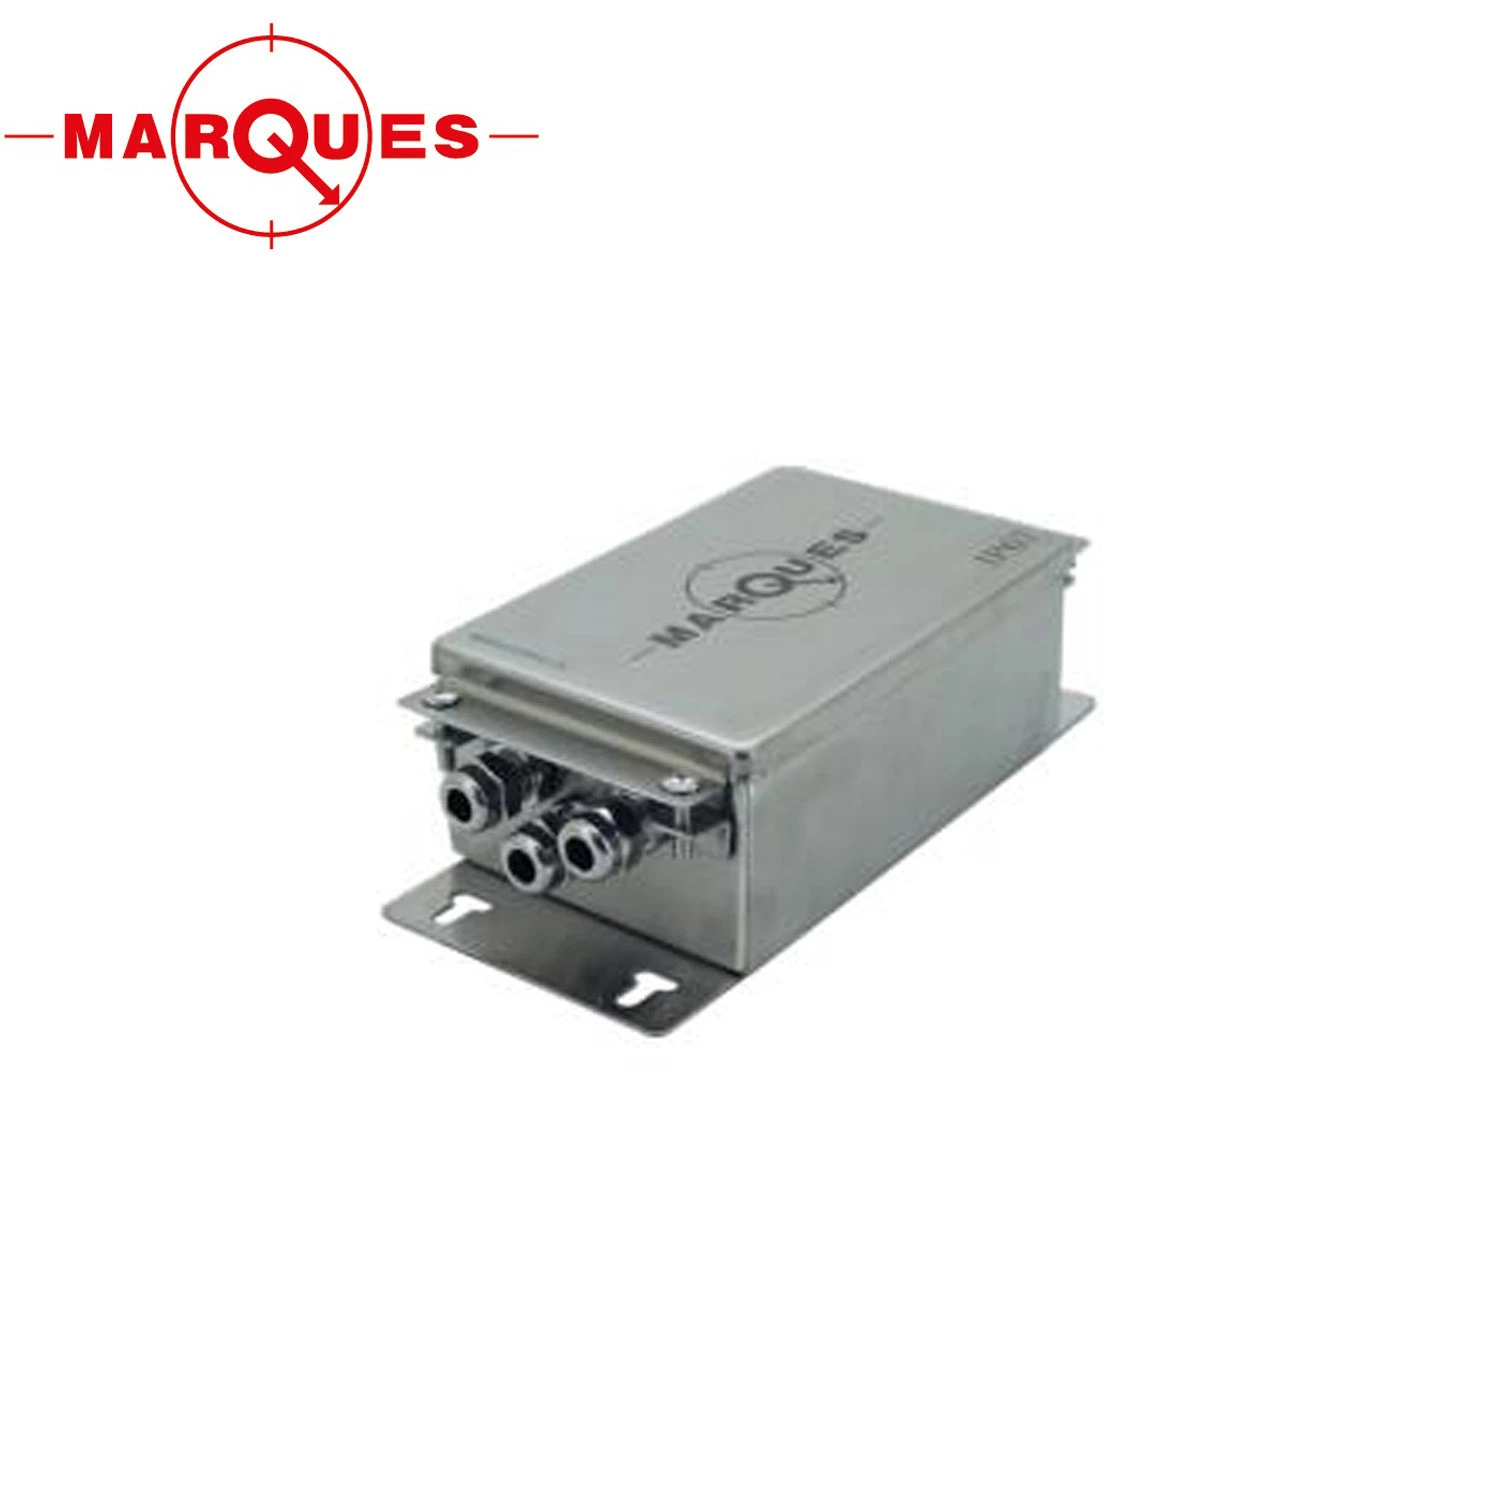 4-Line Waterproof Stainless Steel Junction Box Compatible with All Marques Platforms IP67